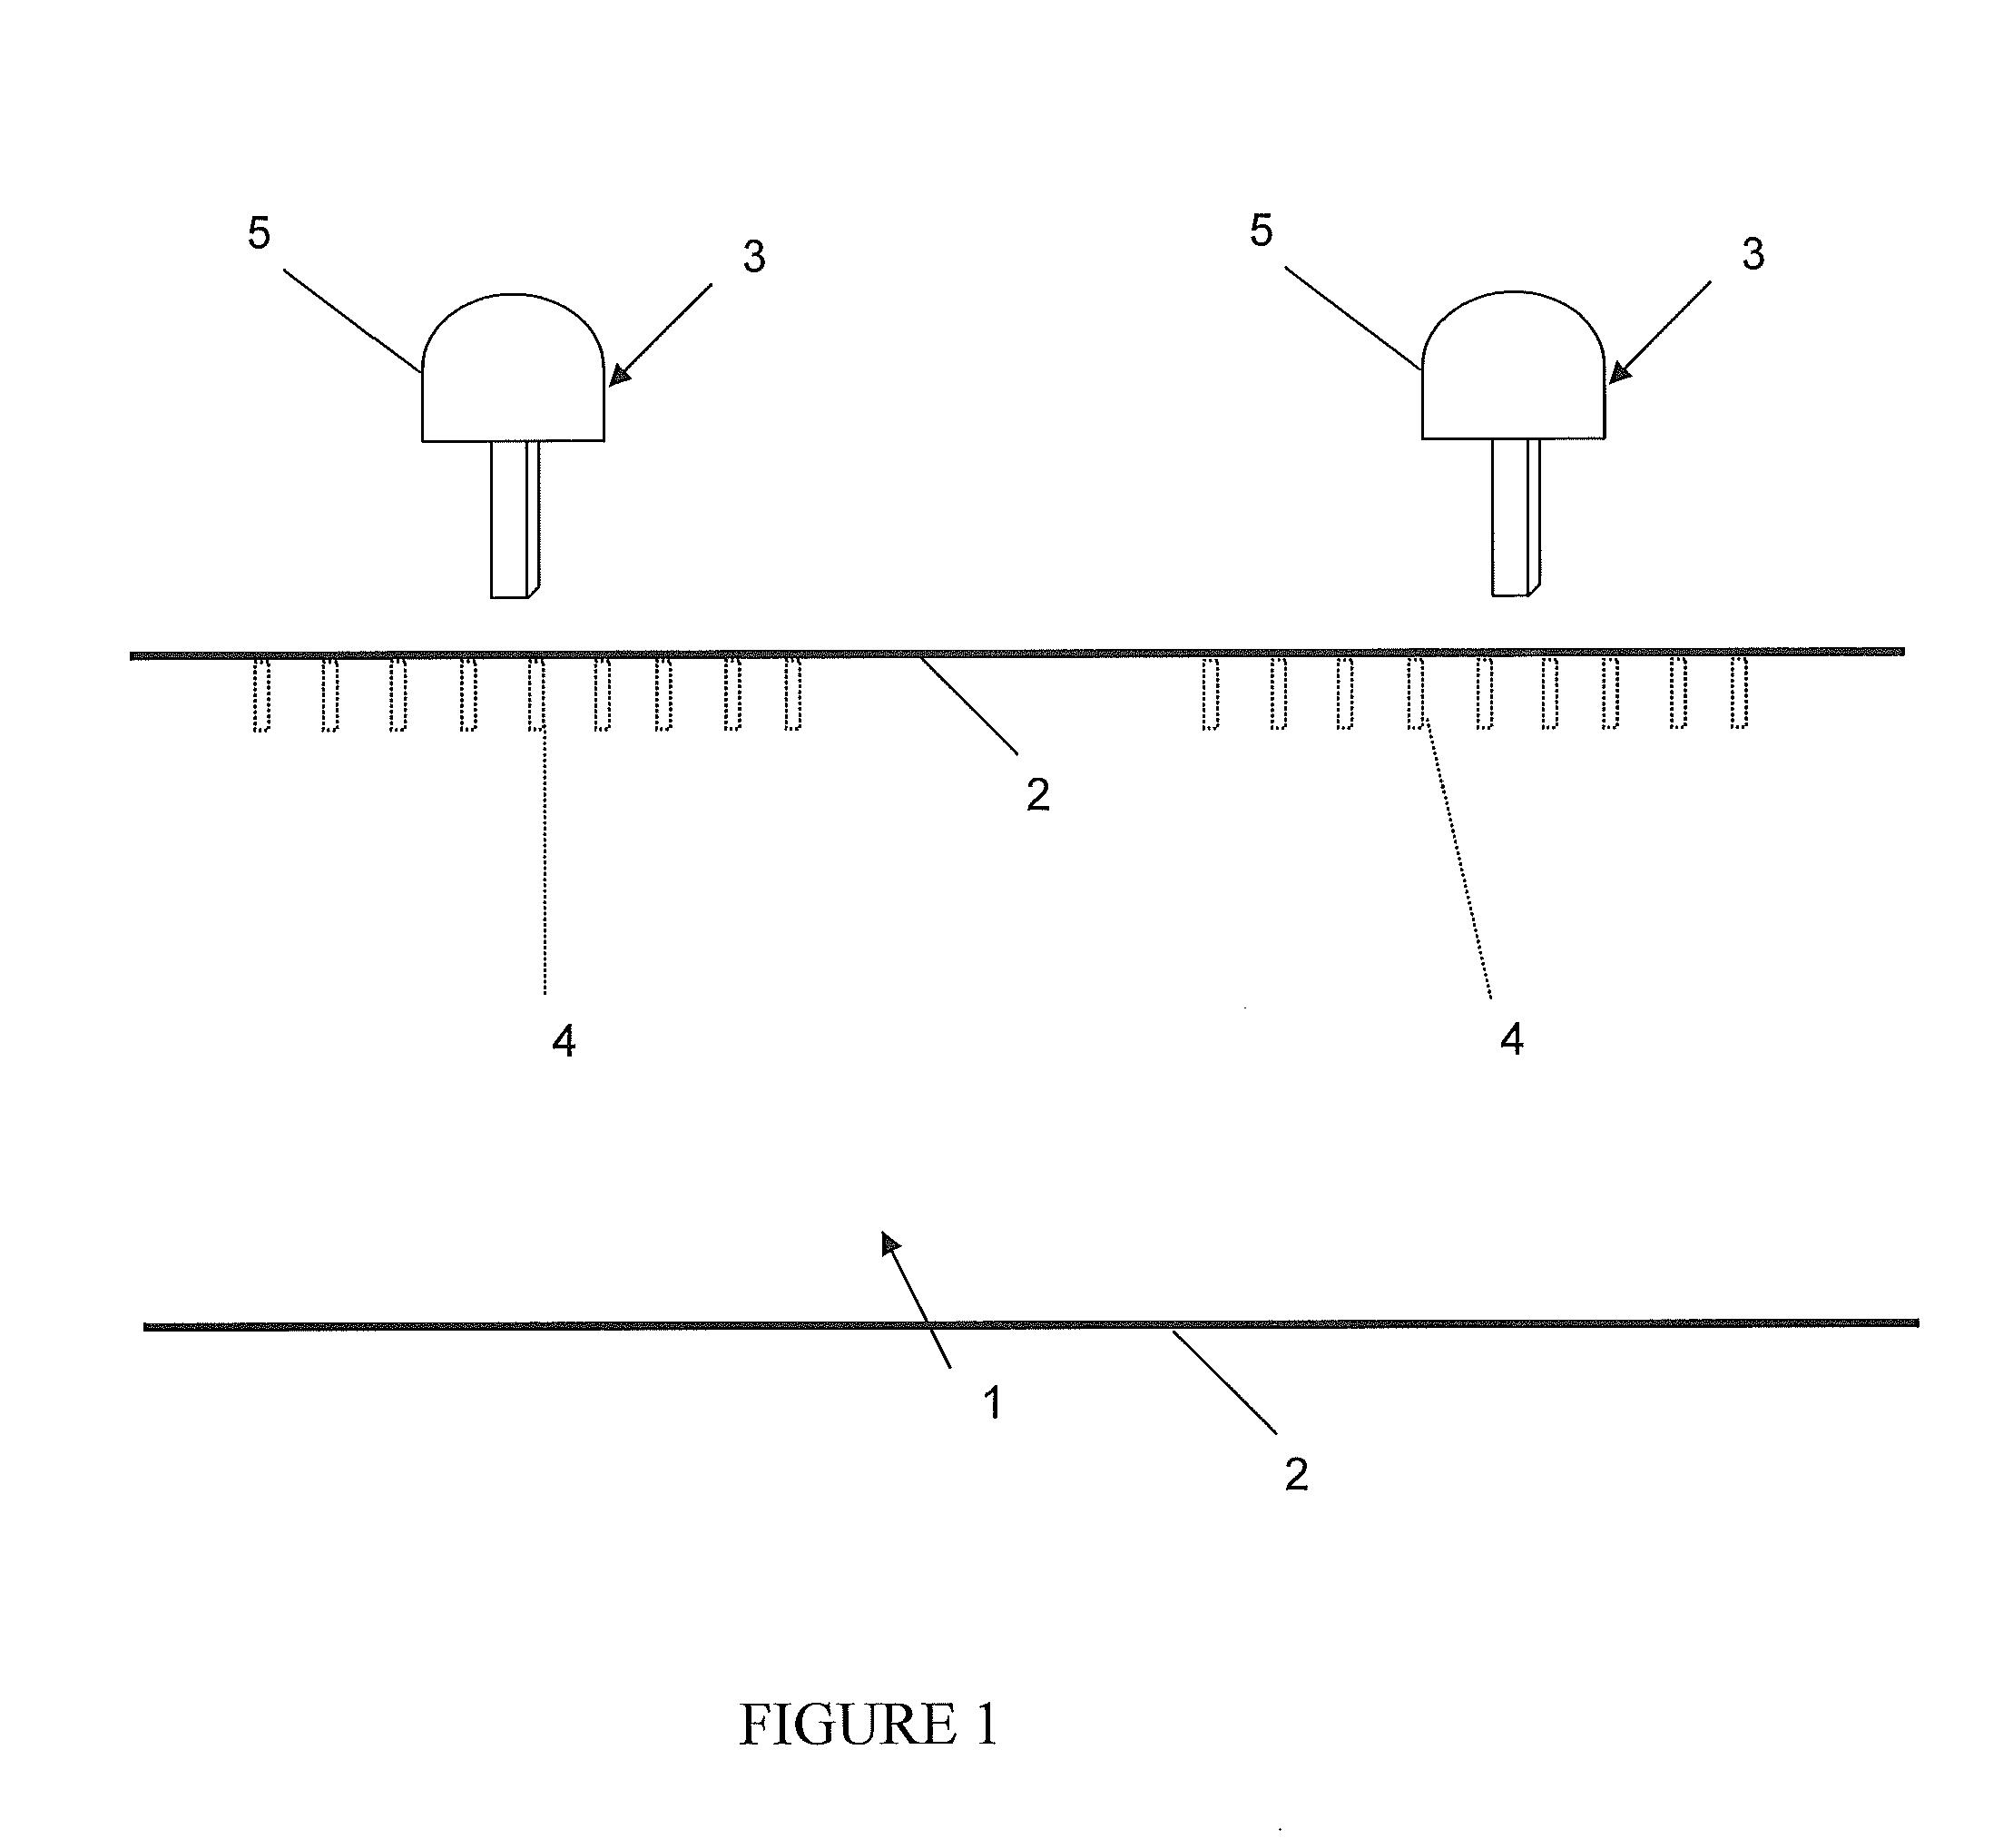 Method of Assessing Parking Fees Based Upon Vehicle Length